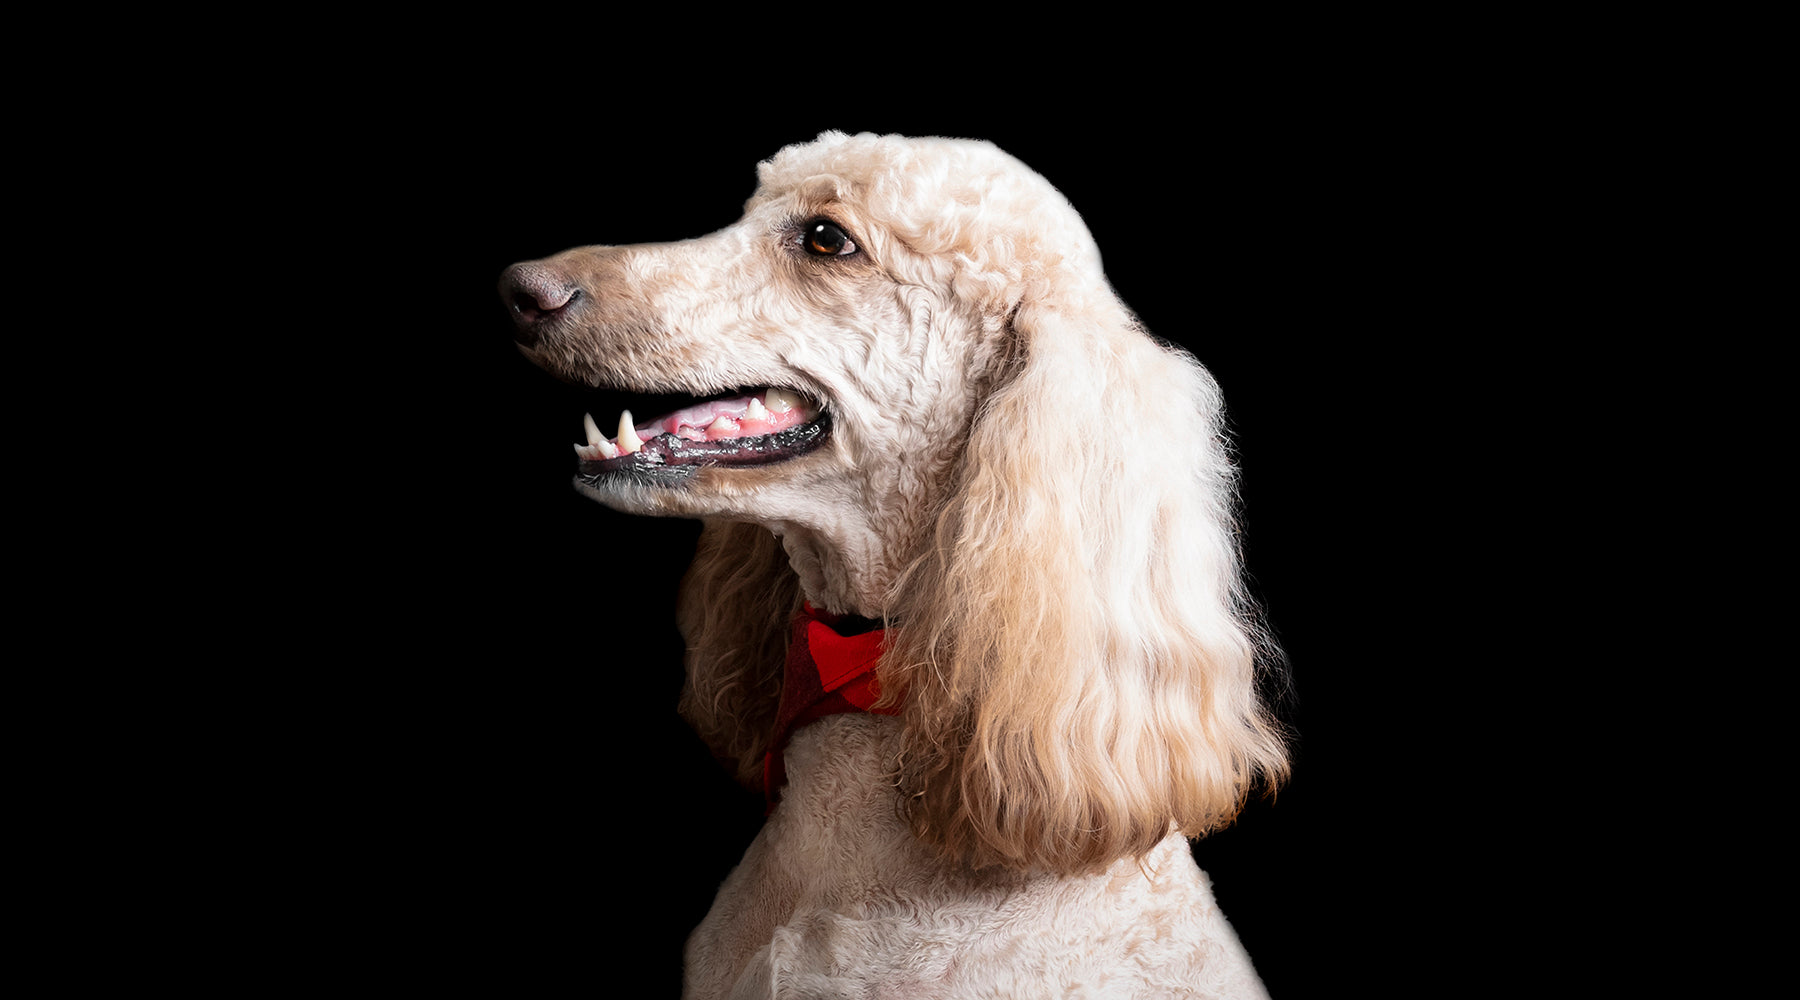 Dog Black Background Photography Portrait Sessions in Georgia and South Carolina